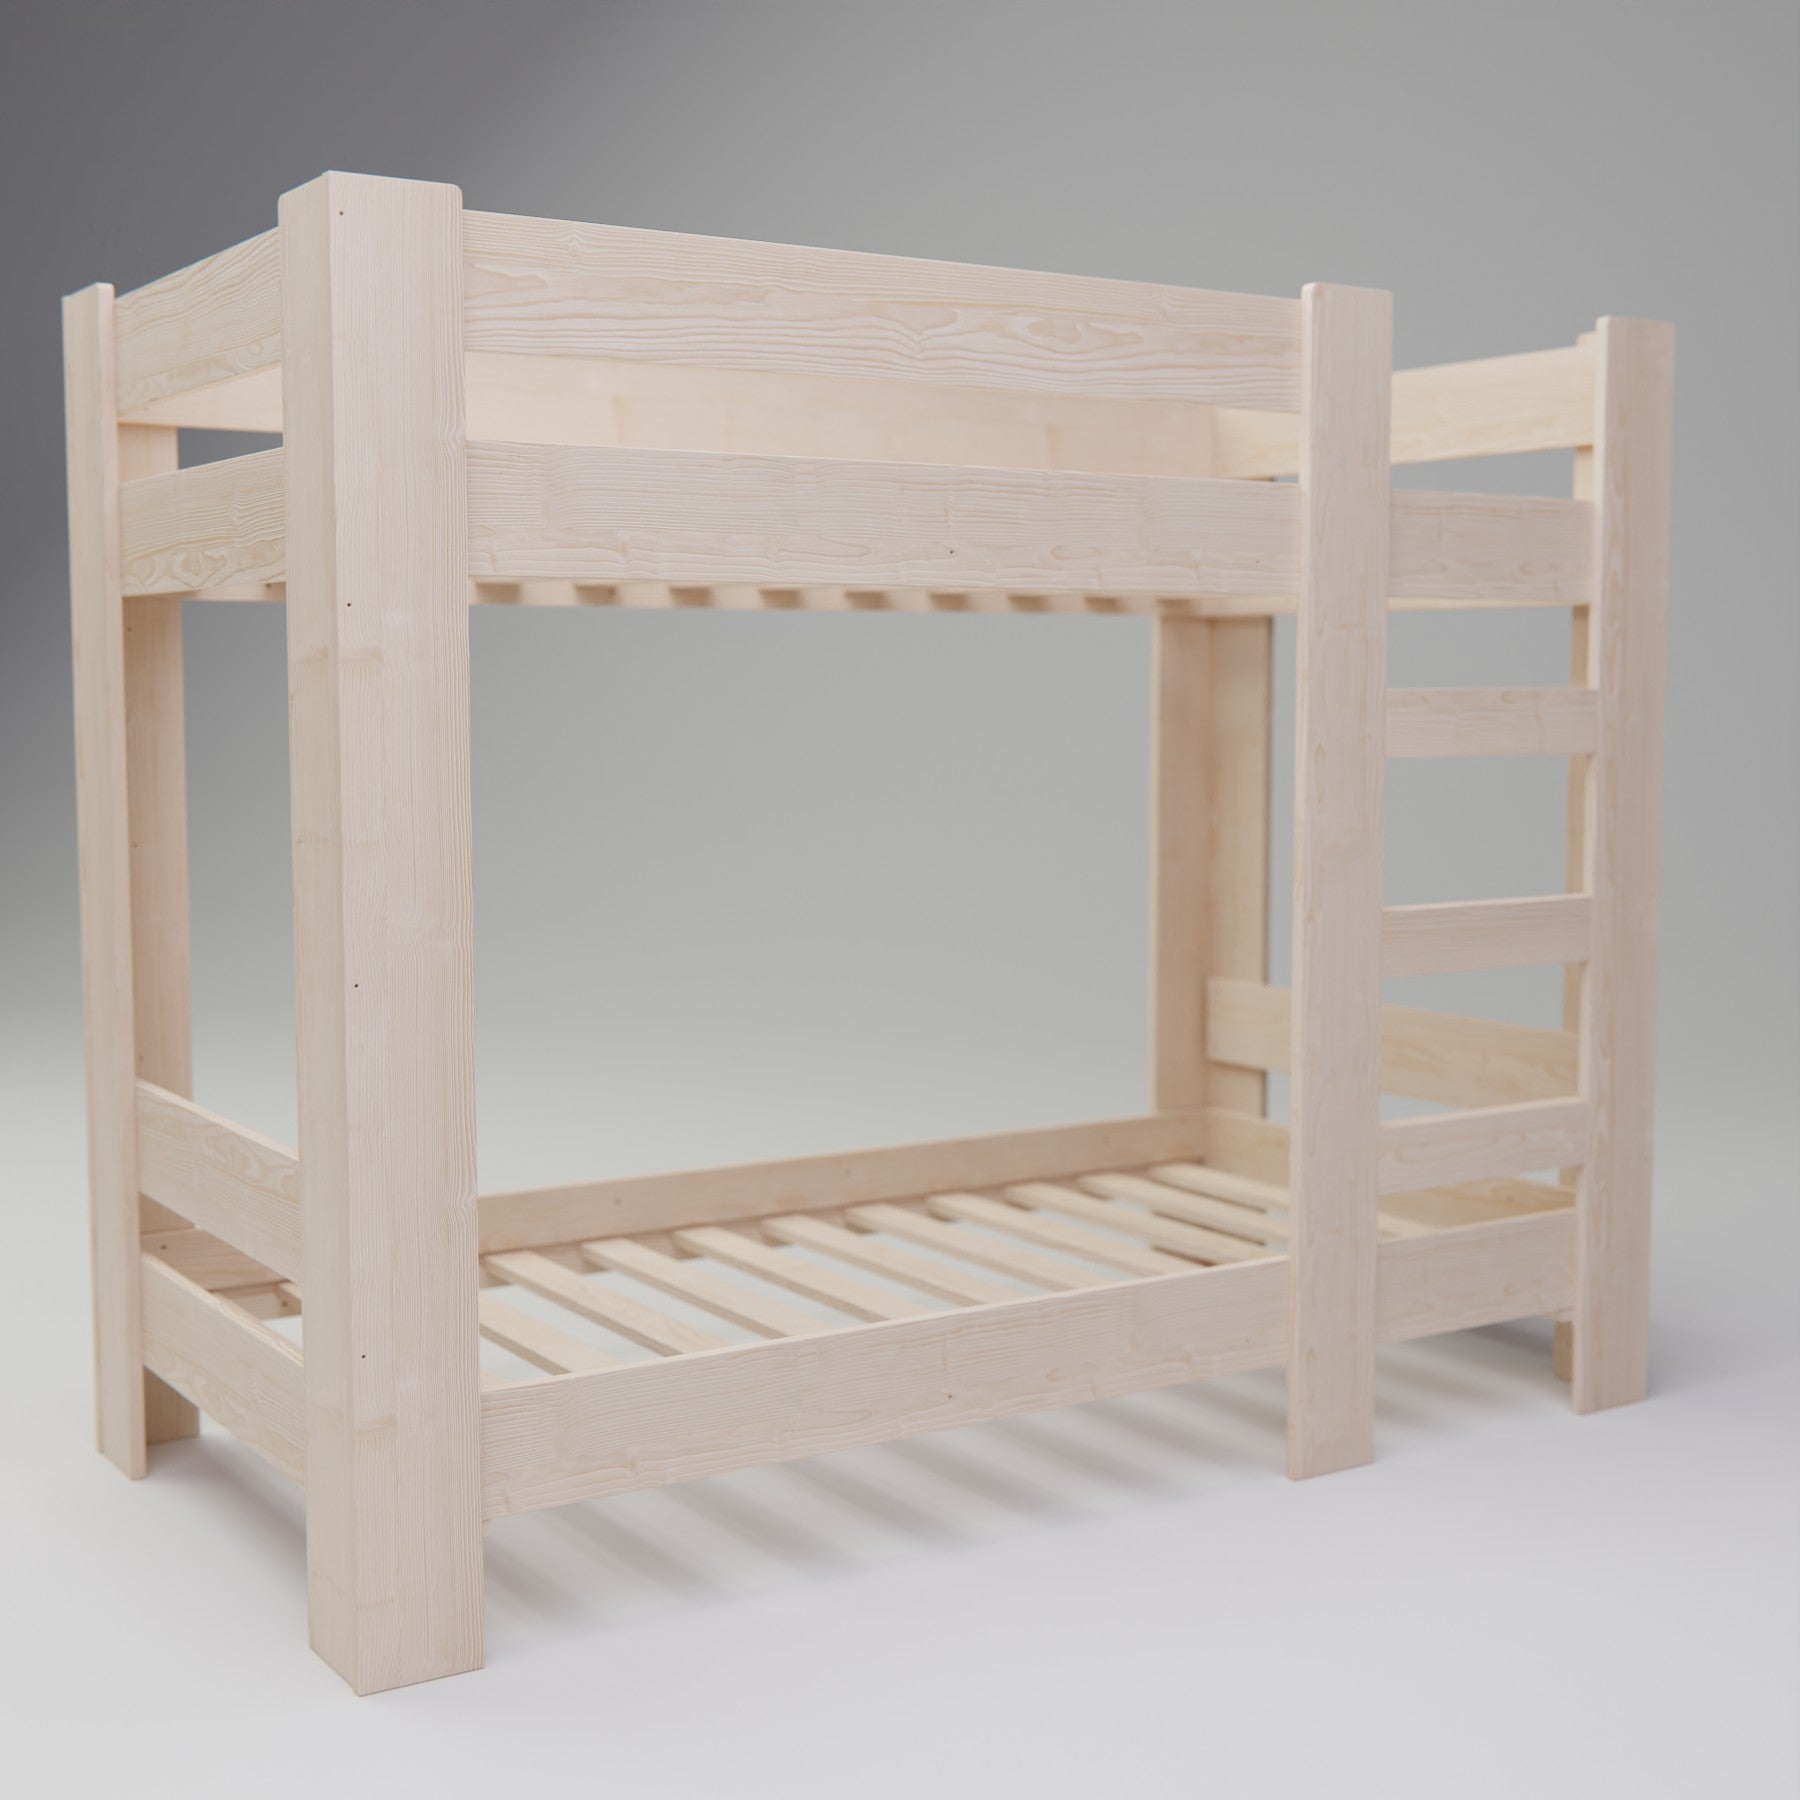 Looking for a durable and eco-friendly bunk bed? Our solid NZ Pine construction ensures sturdiness while being environmentally friendly.